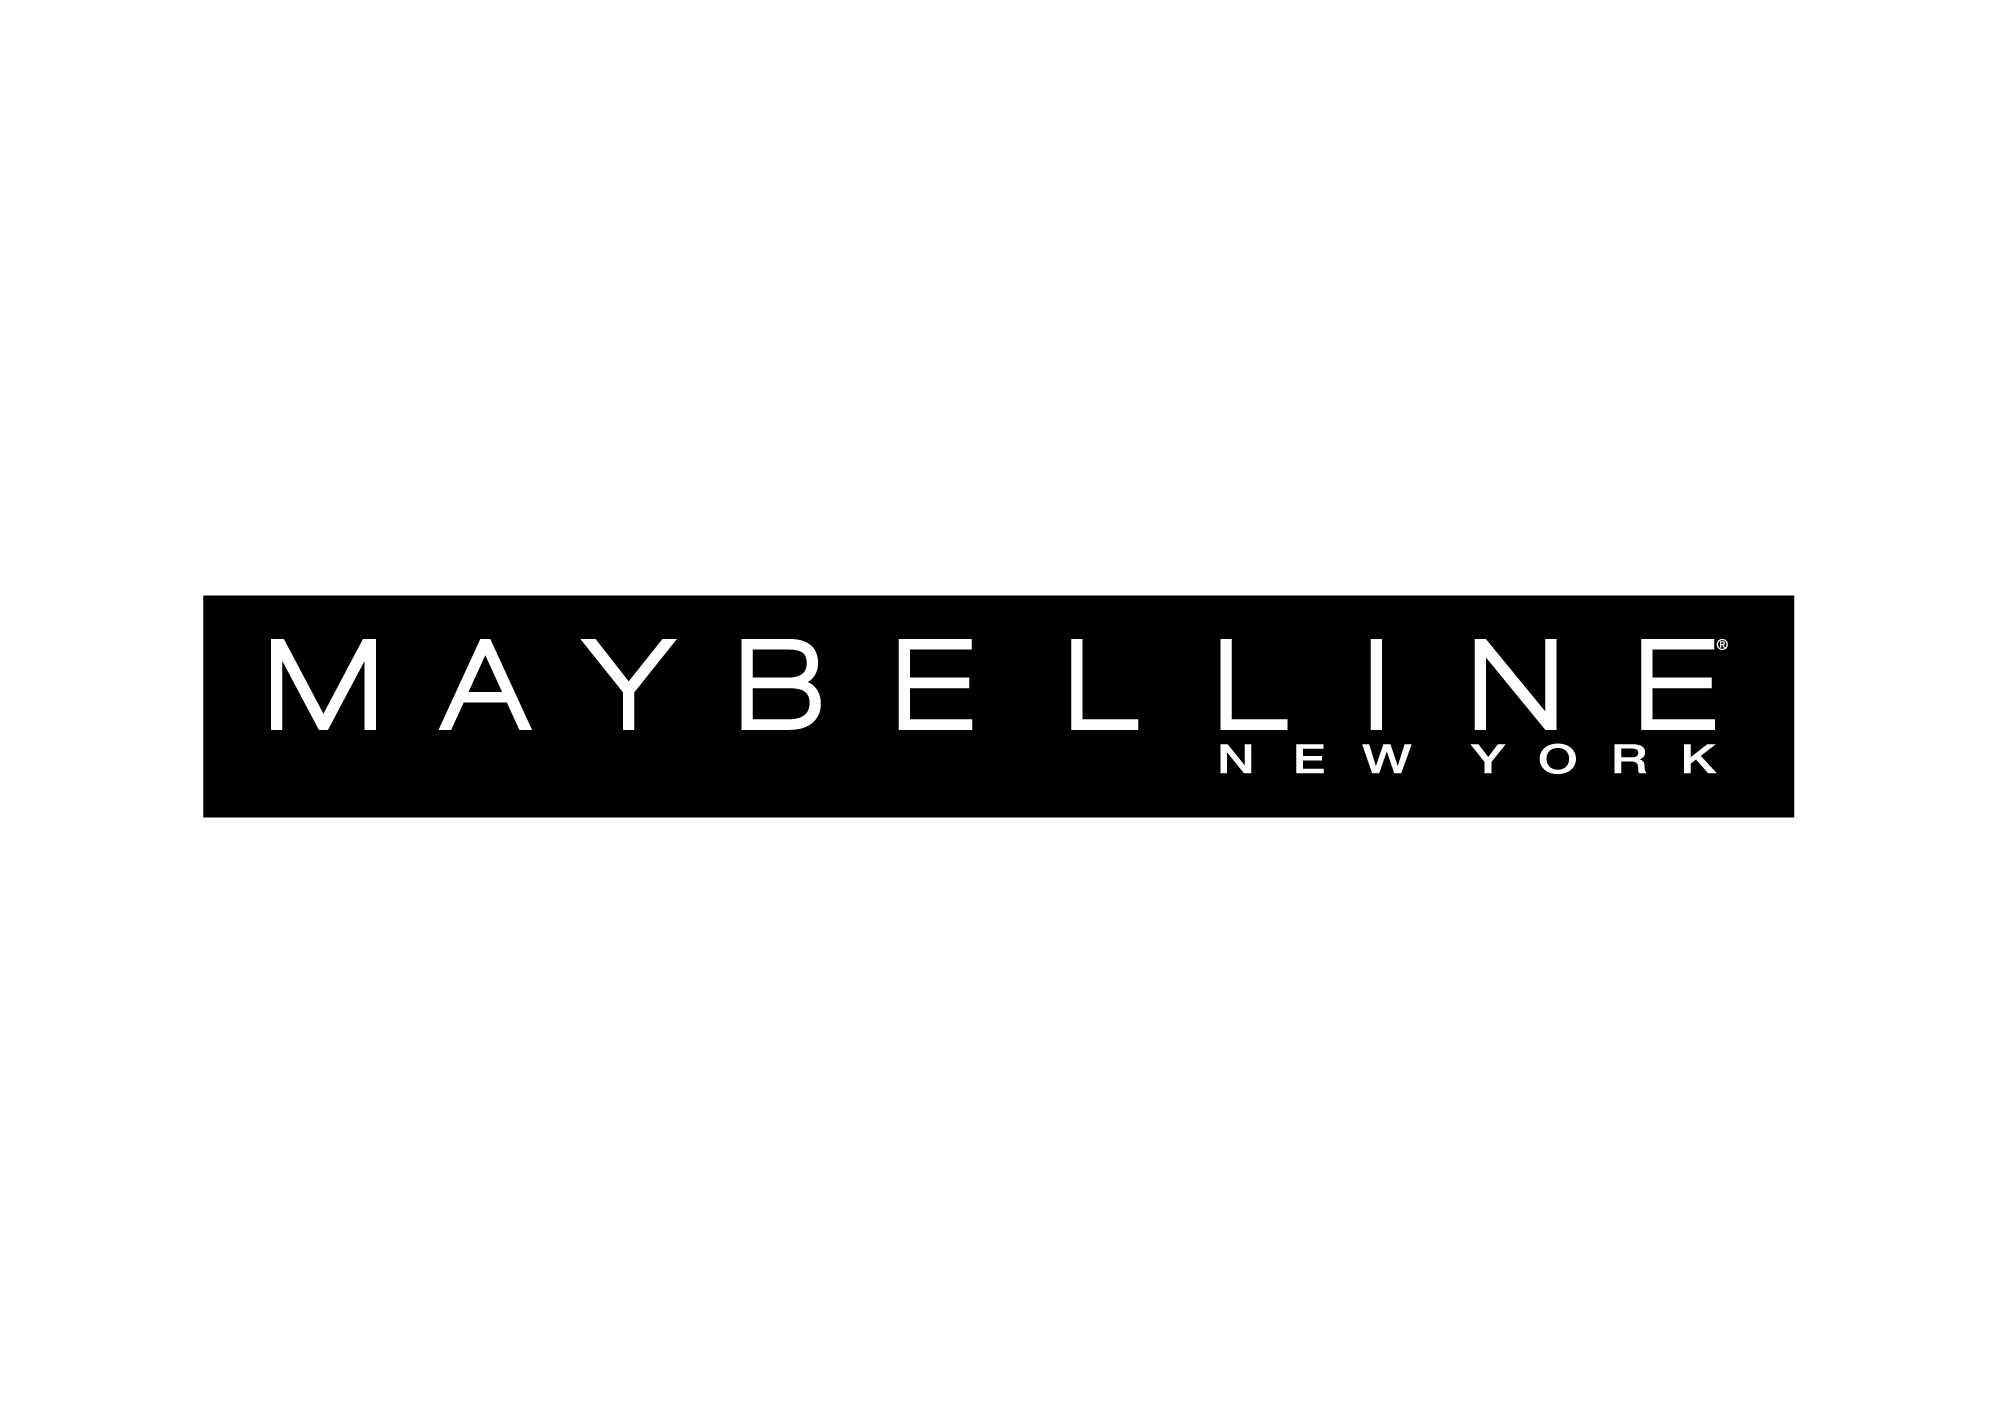 Maybelline Logo - Pin by Alexandra Gheorghe on Logo in 2019 | Maybelline, Logos, Branding